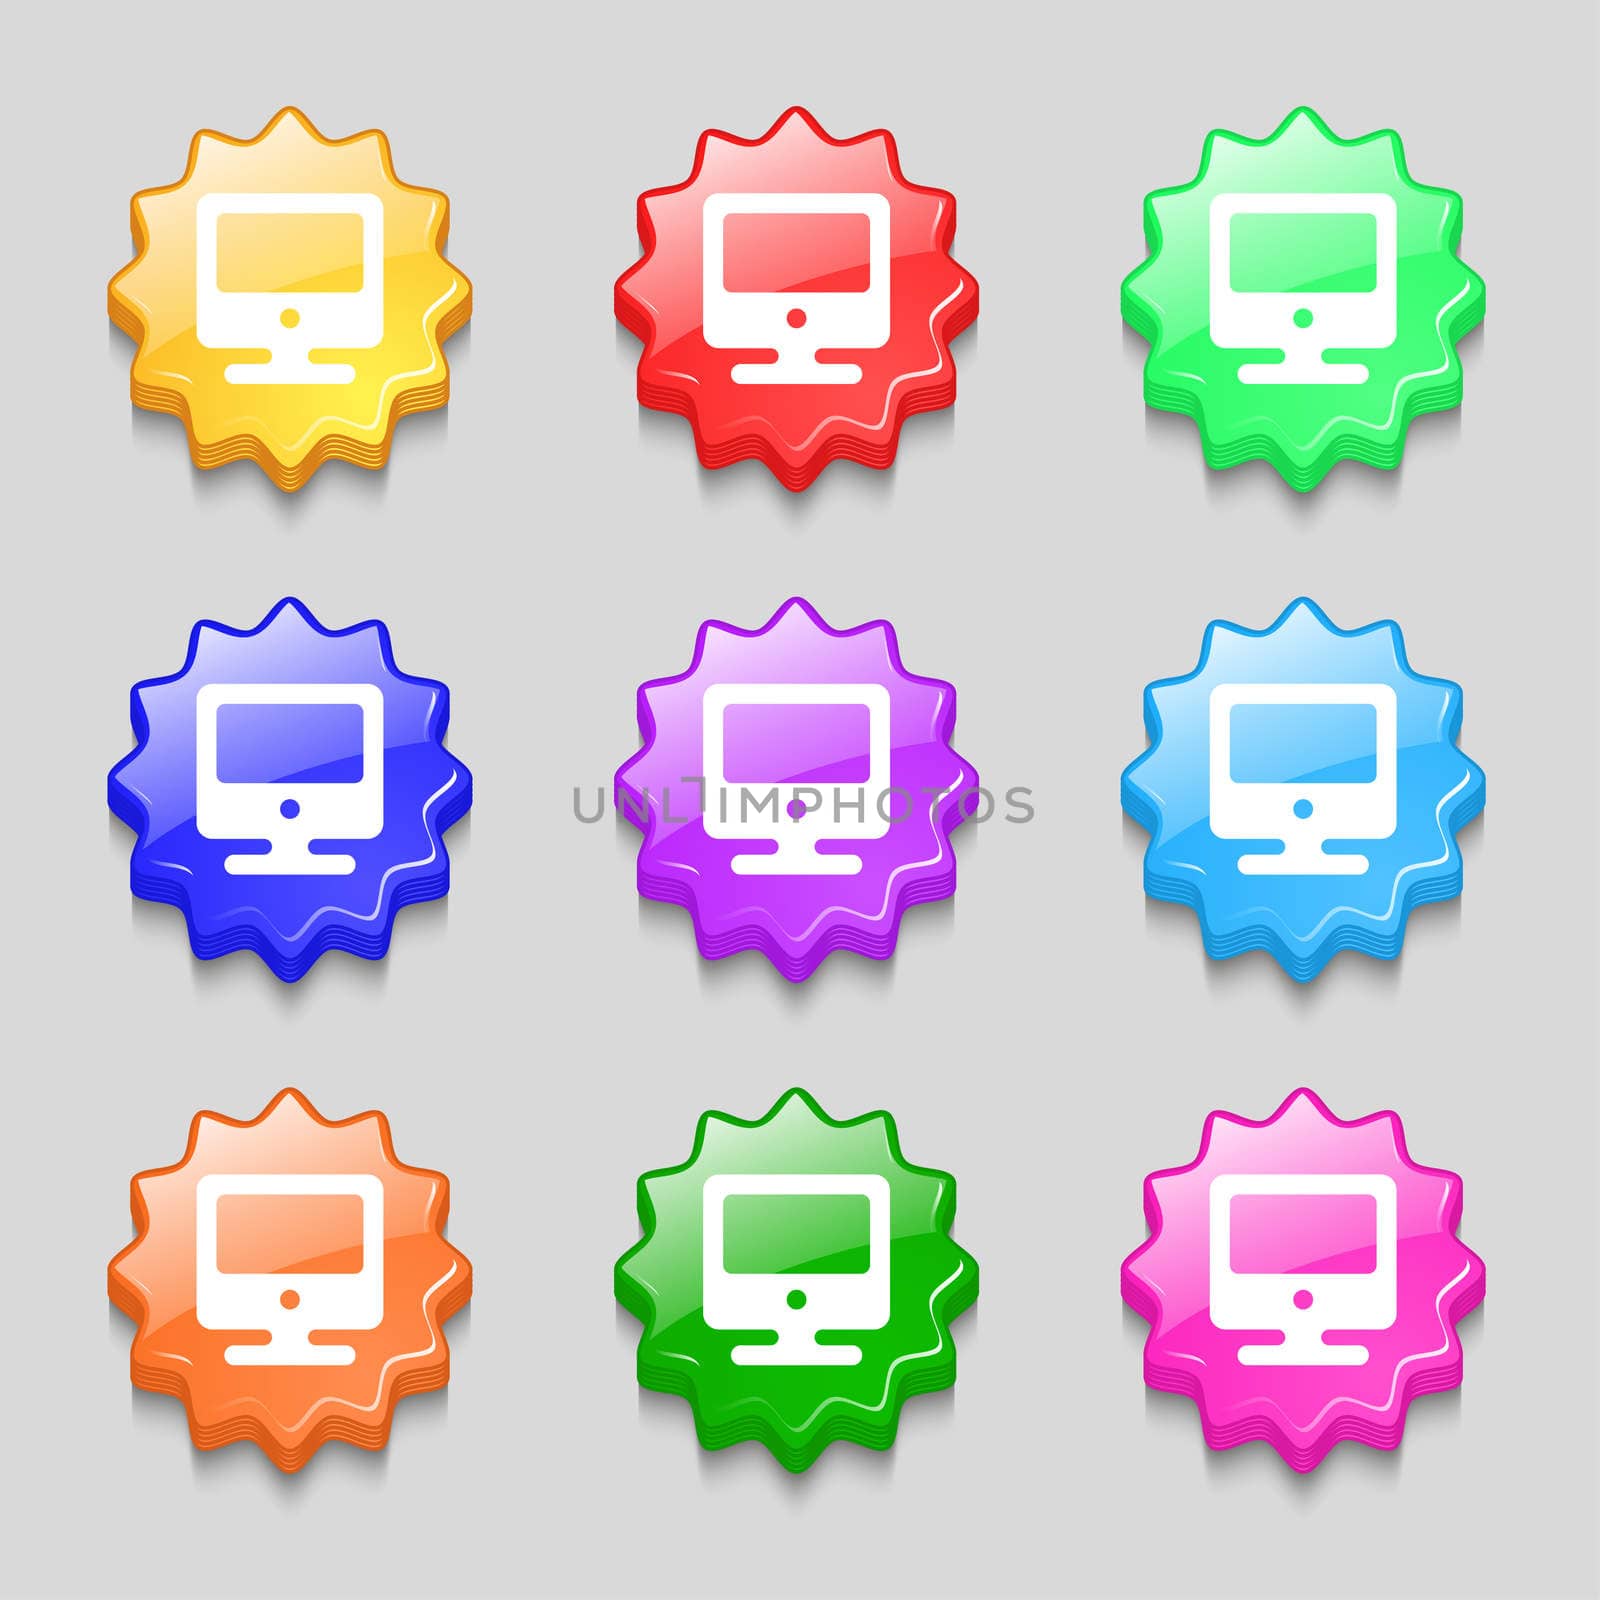 monitor icon sign. symbol on nine wavy colourful buttons. illustration